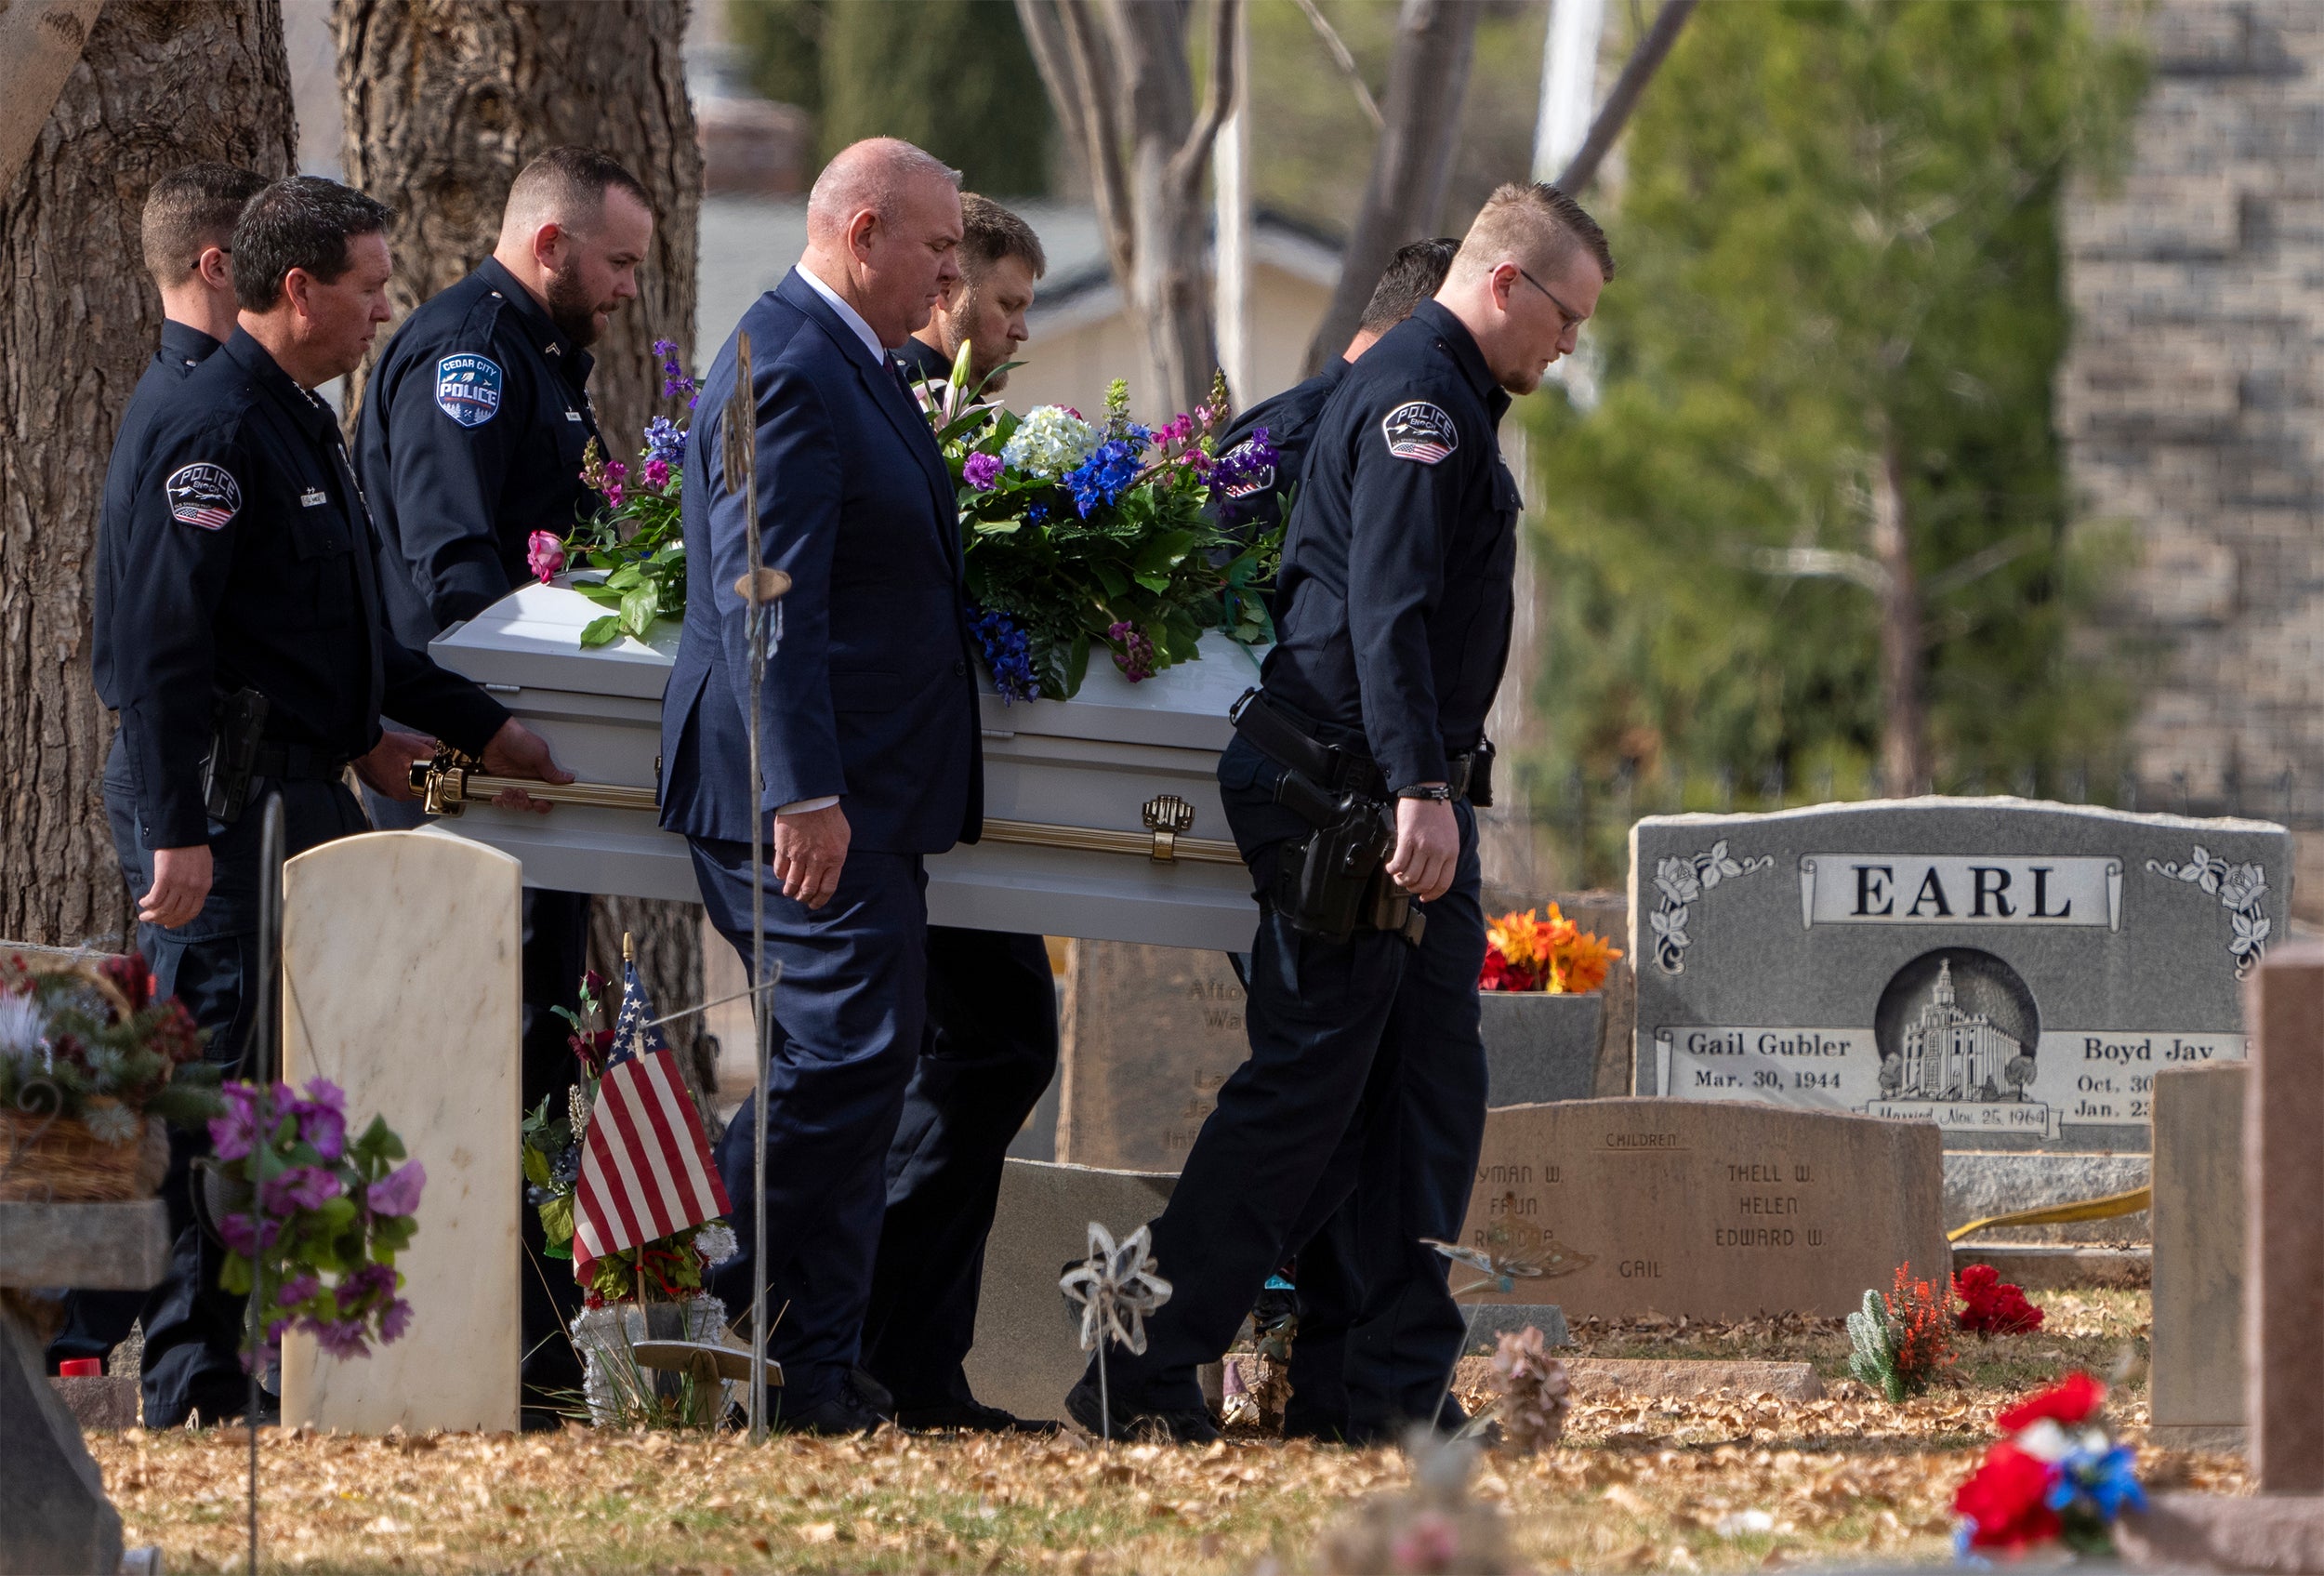 Pallbearers carry a casket to the graveside service for the Haight and Earl families in La Verkin, Utah